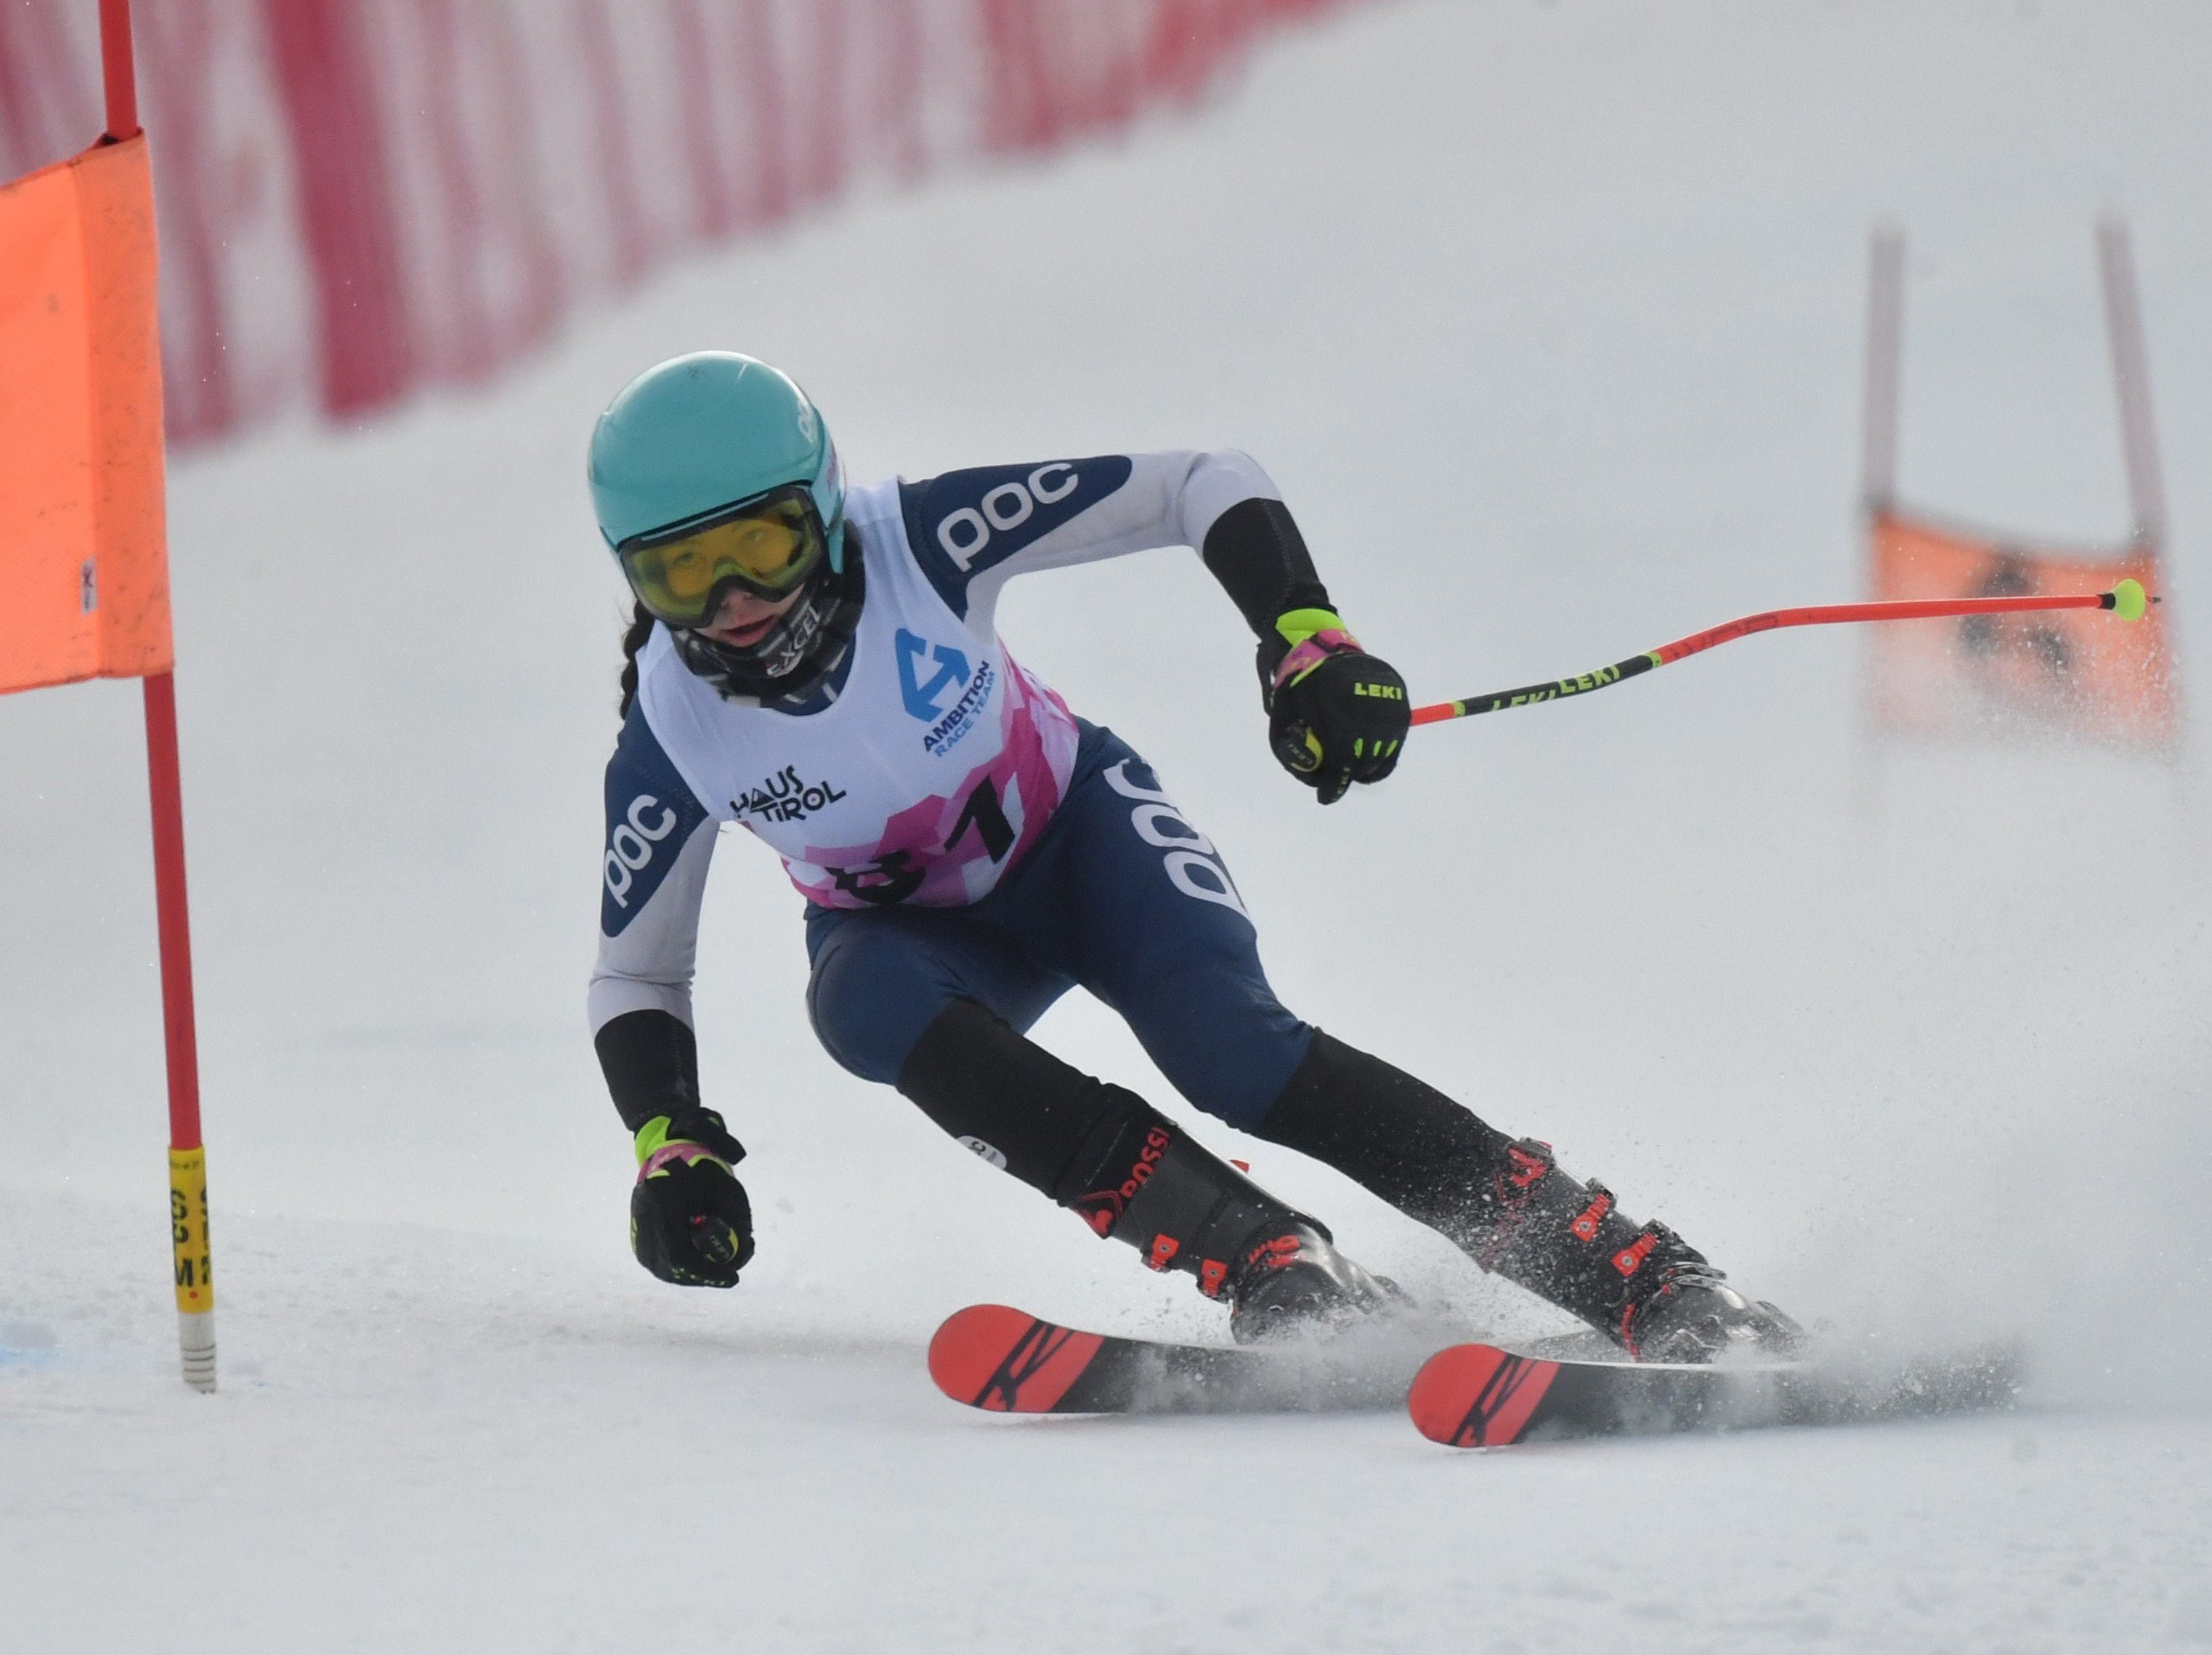 Stafford teenager takes to the slopes for Scotland